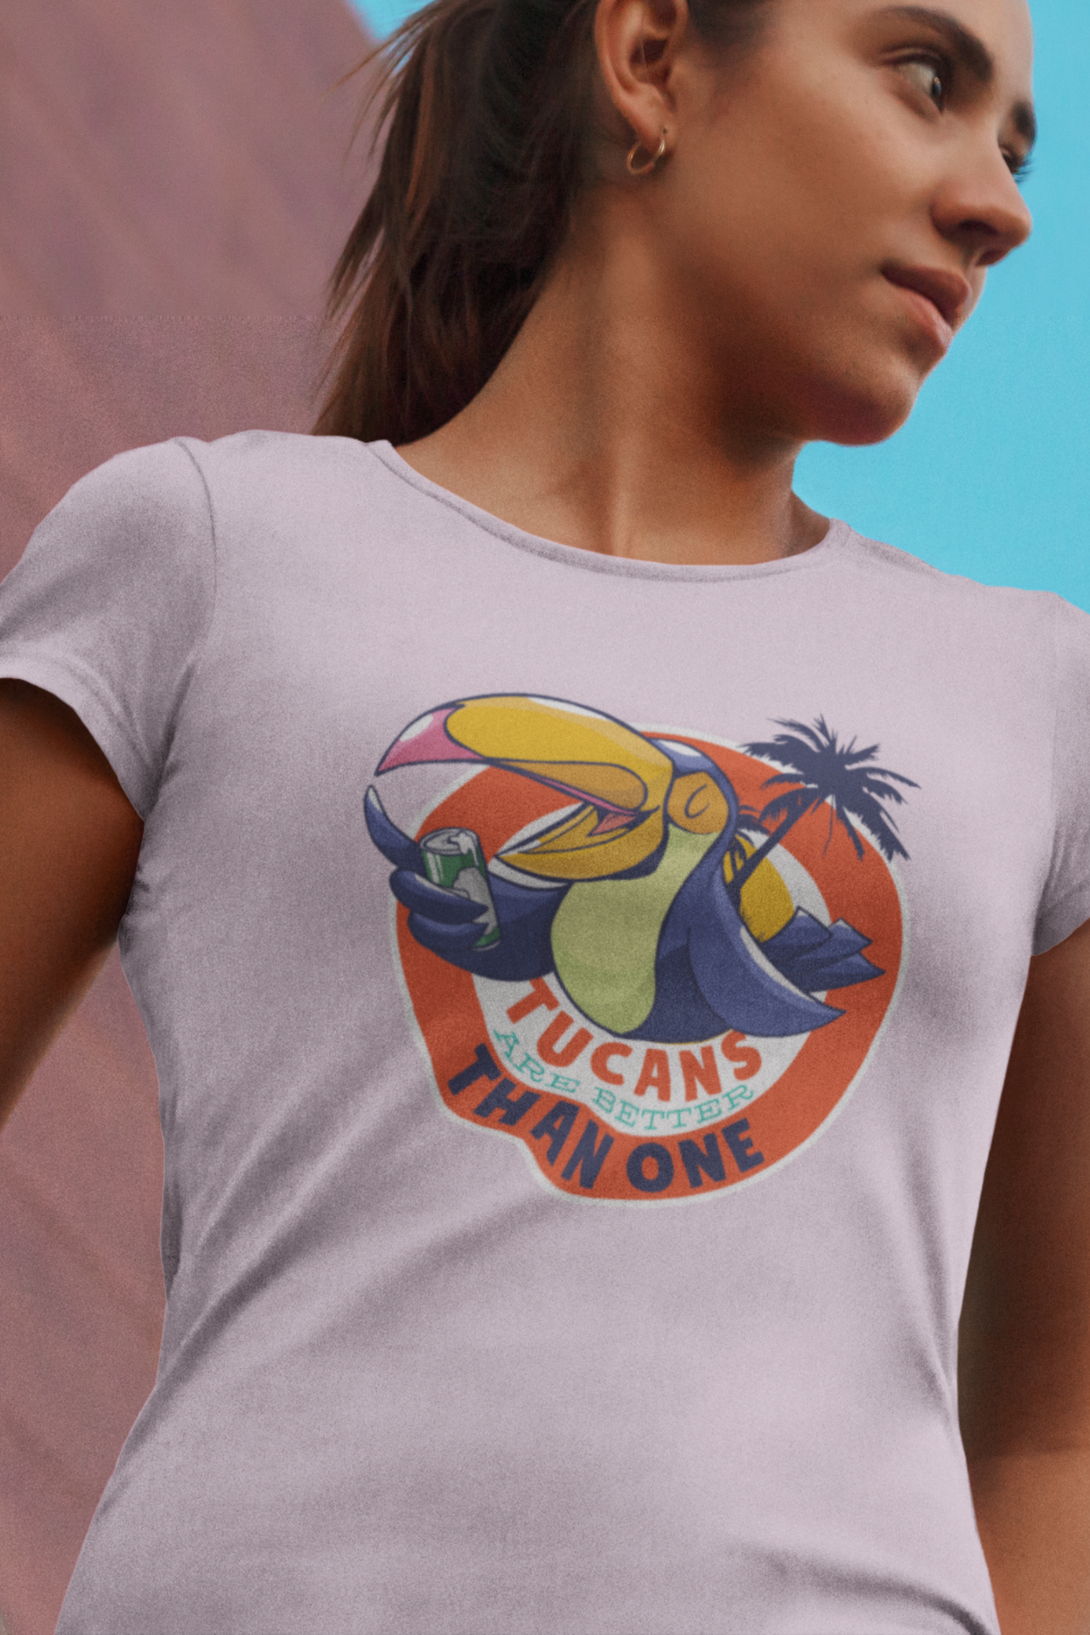 Tucans Are Better Tha One Printed T-Shirt For Women - WowWaves - 8